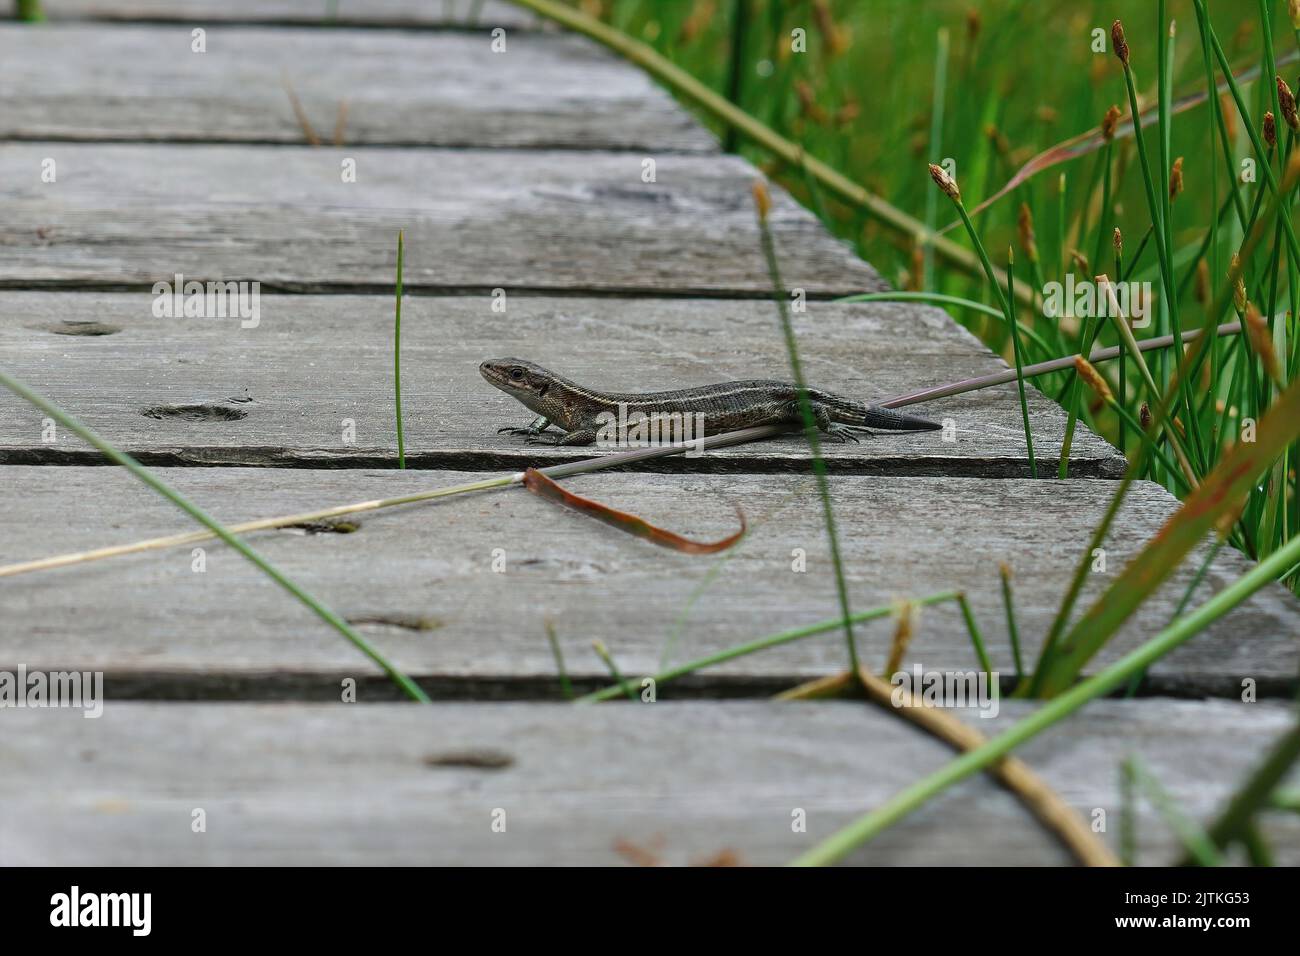 A closeup of a common lizard on a wooden pathway on a sunny day Stock Photo